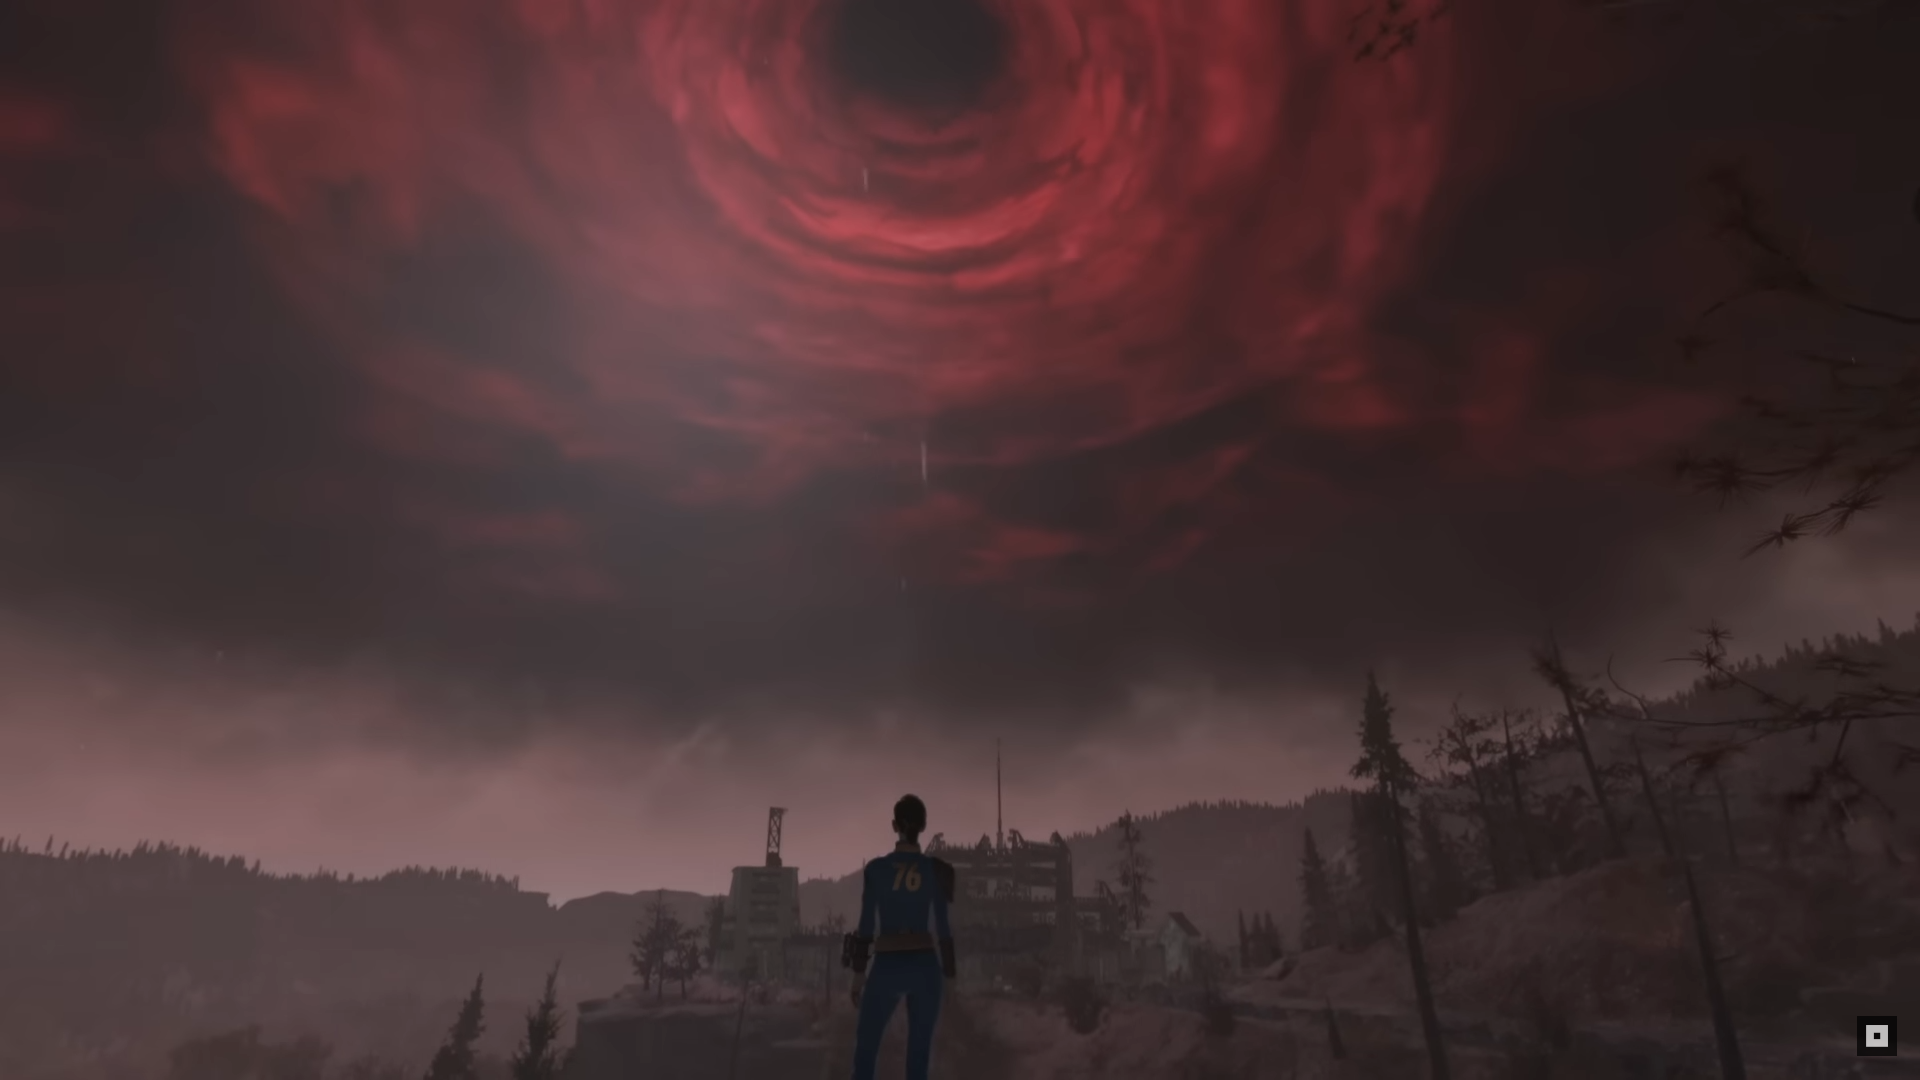 A Vault Dweller from Vault 76 looks up at the ominous sky in Fallout 76’s Skyline Valley, which is a swirling red miasma around a black sun.